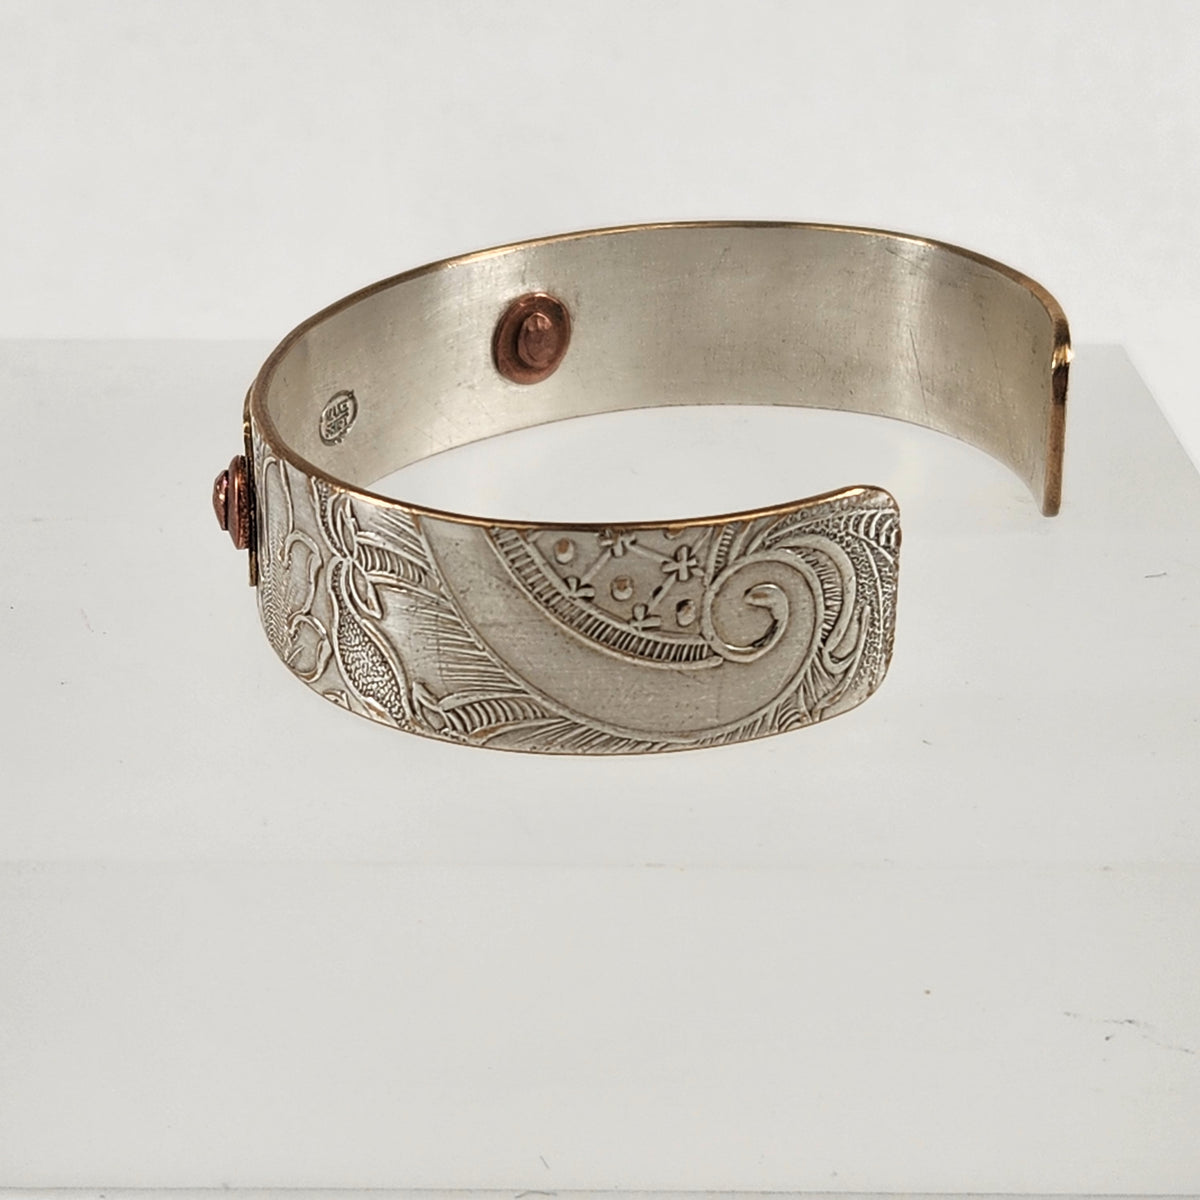 Patent Pending Machine Plate Cuff Bracelet - Heart of the Home PA